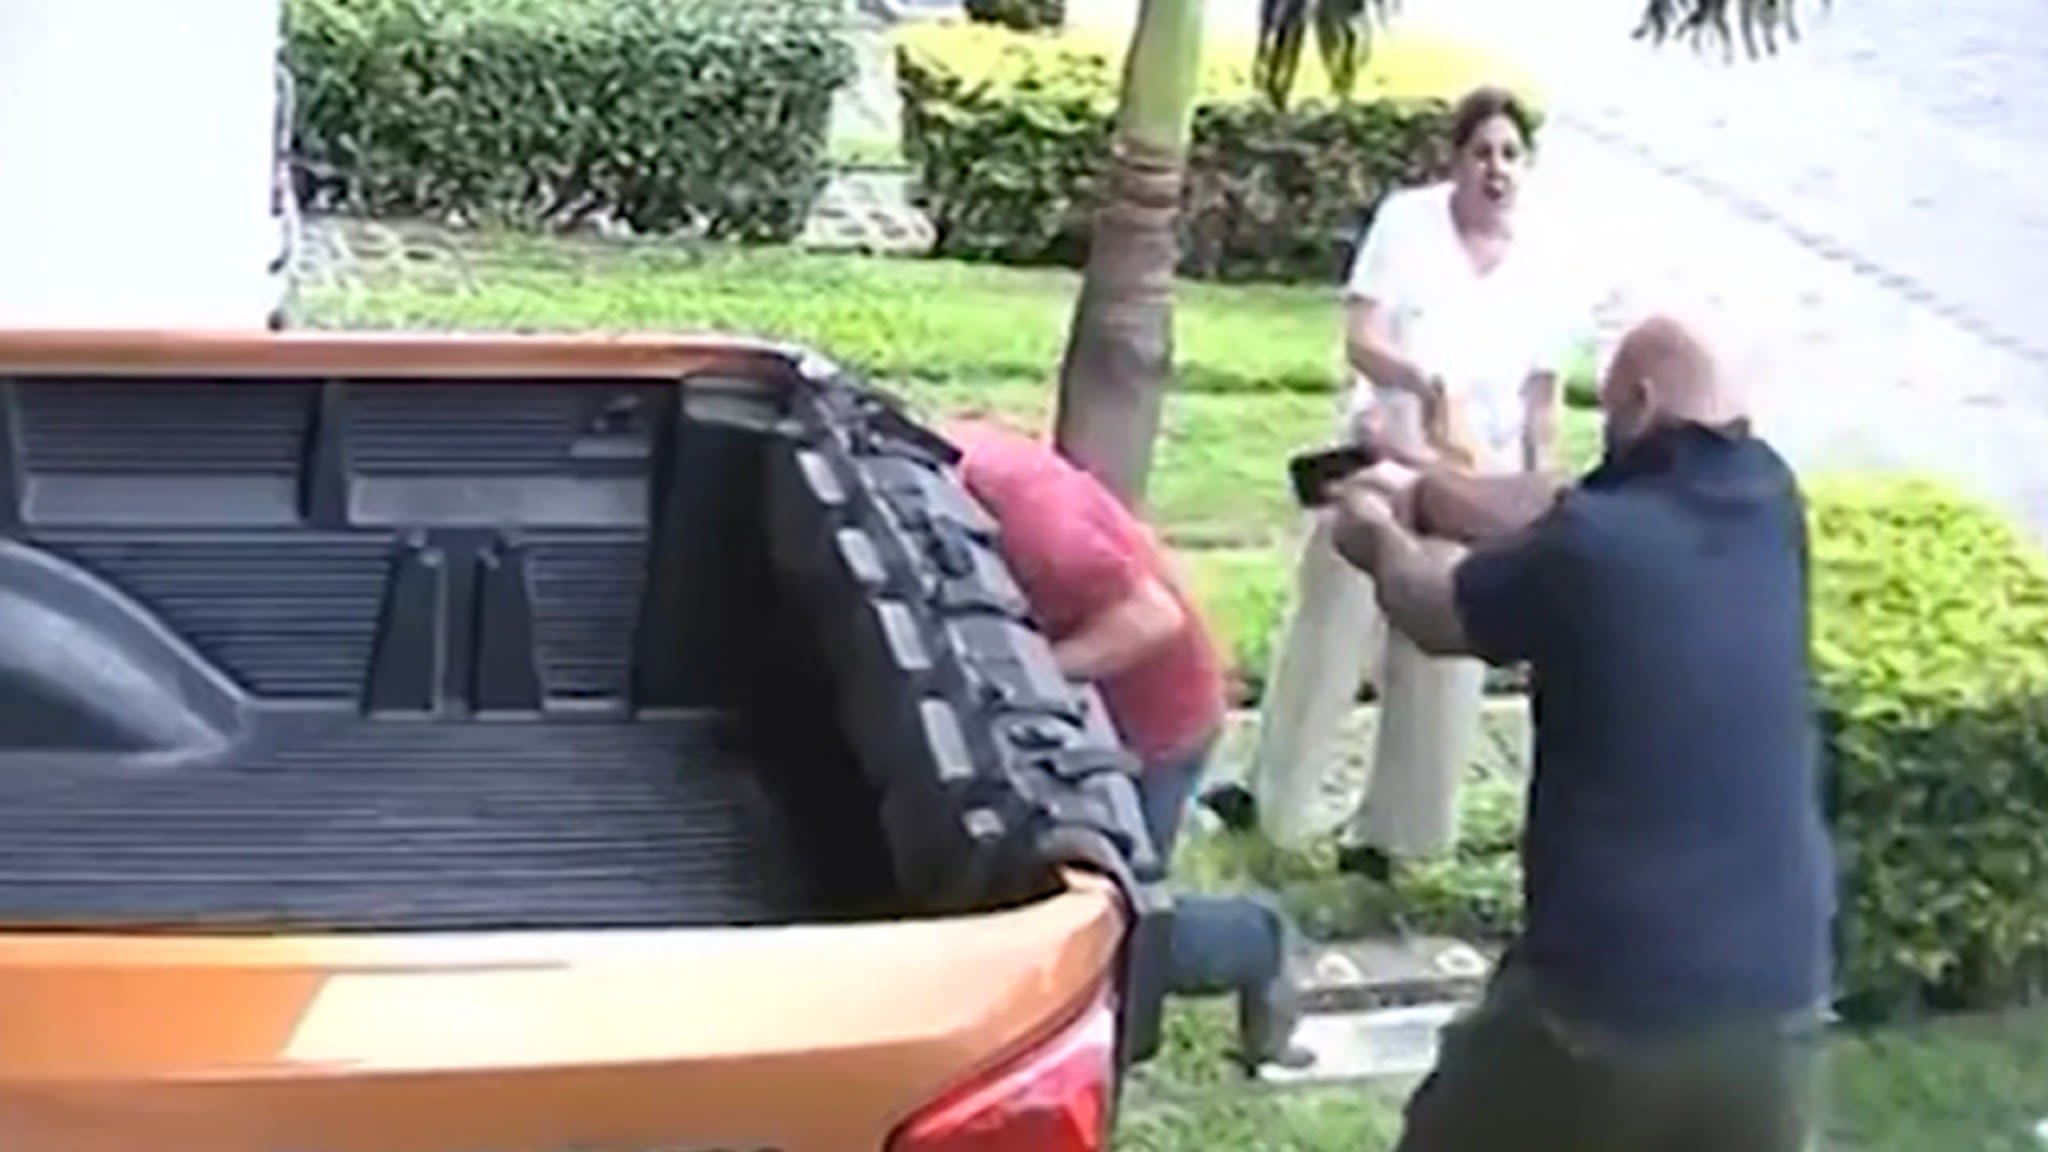 Costa Rican Man Shoots His Neighbor Dead After Heated Argument on Video